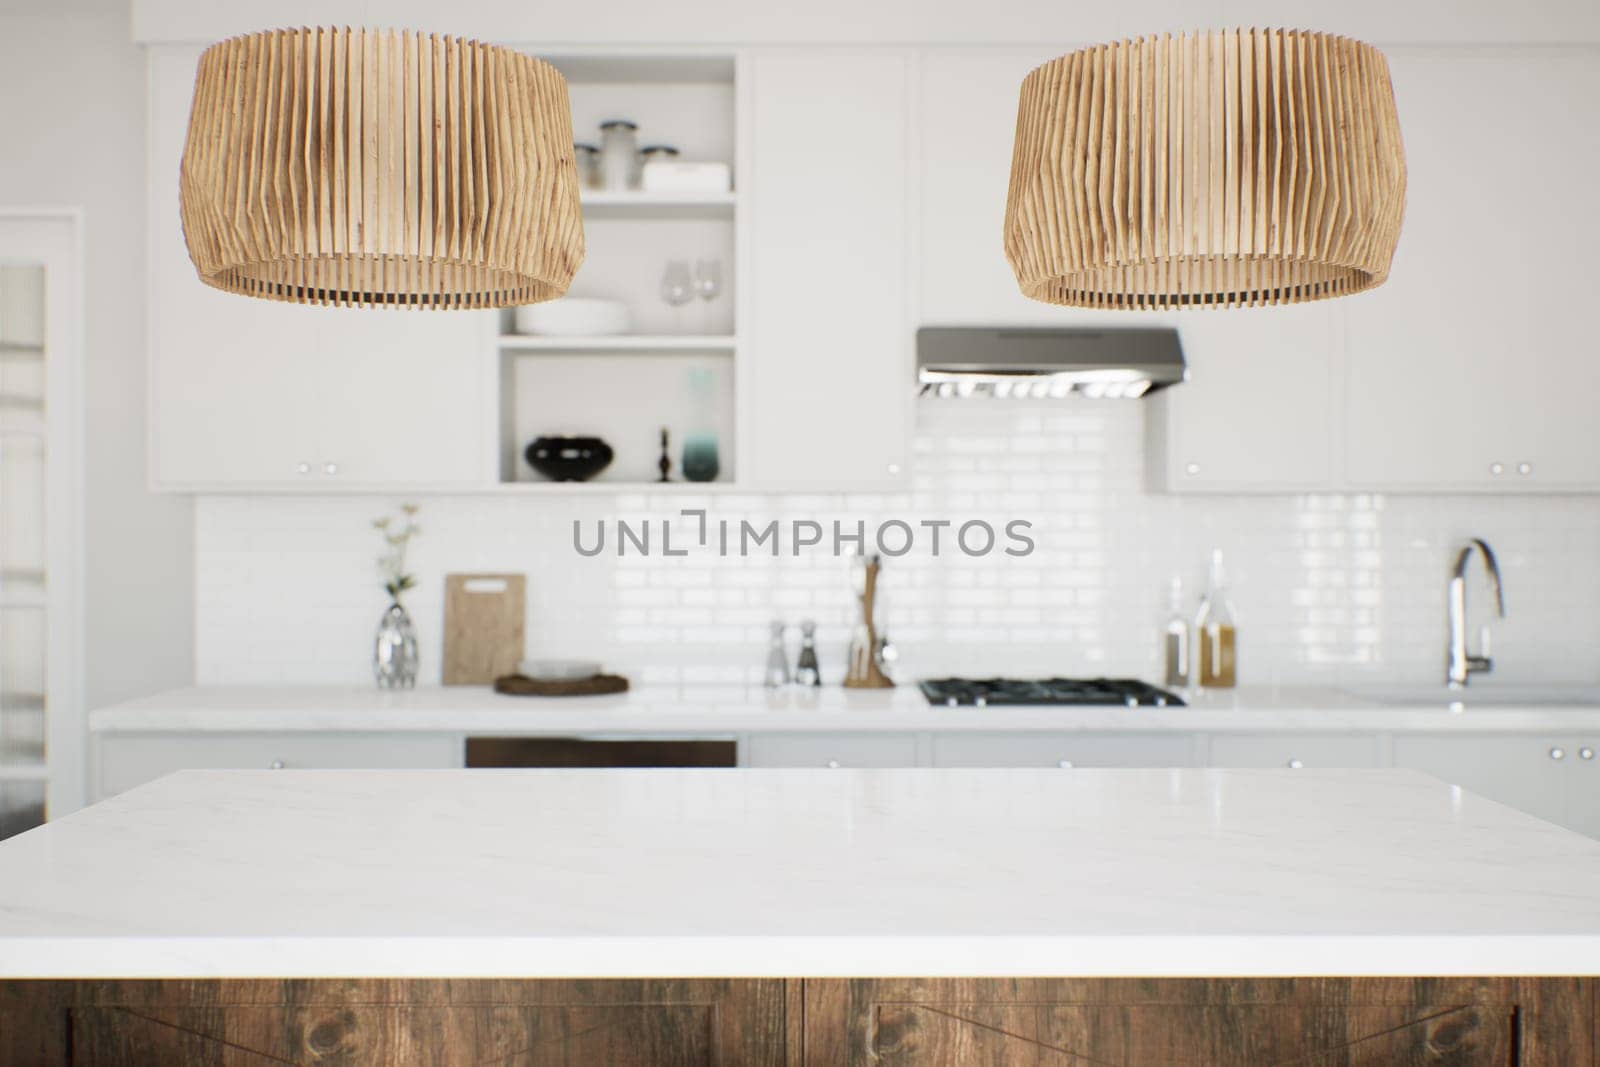 Focus on the marble countertop against the backdrop of kitchen appliances and utensils. by N_Design